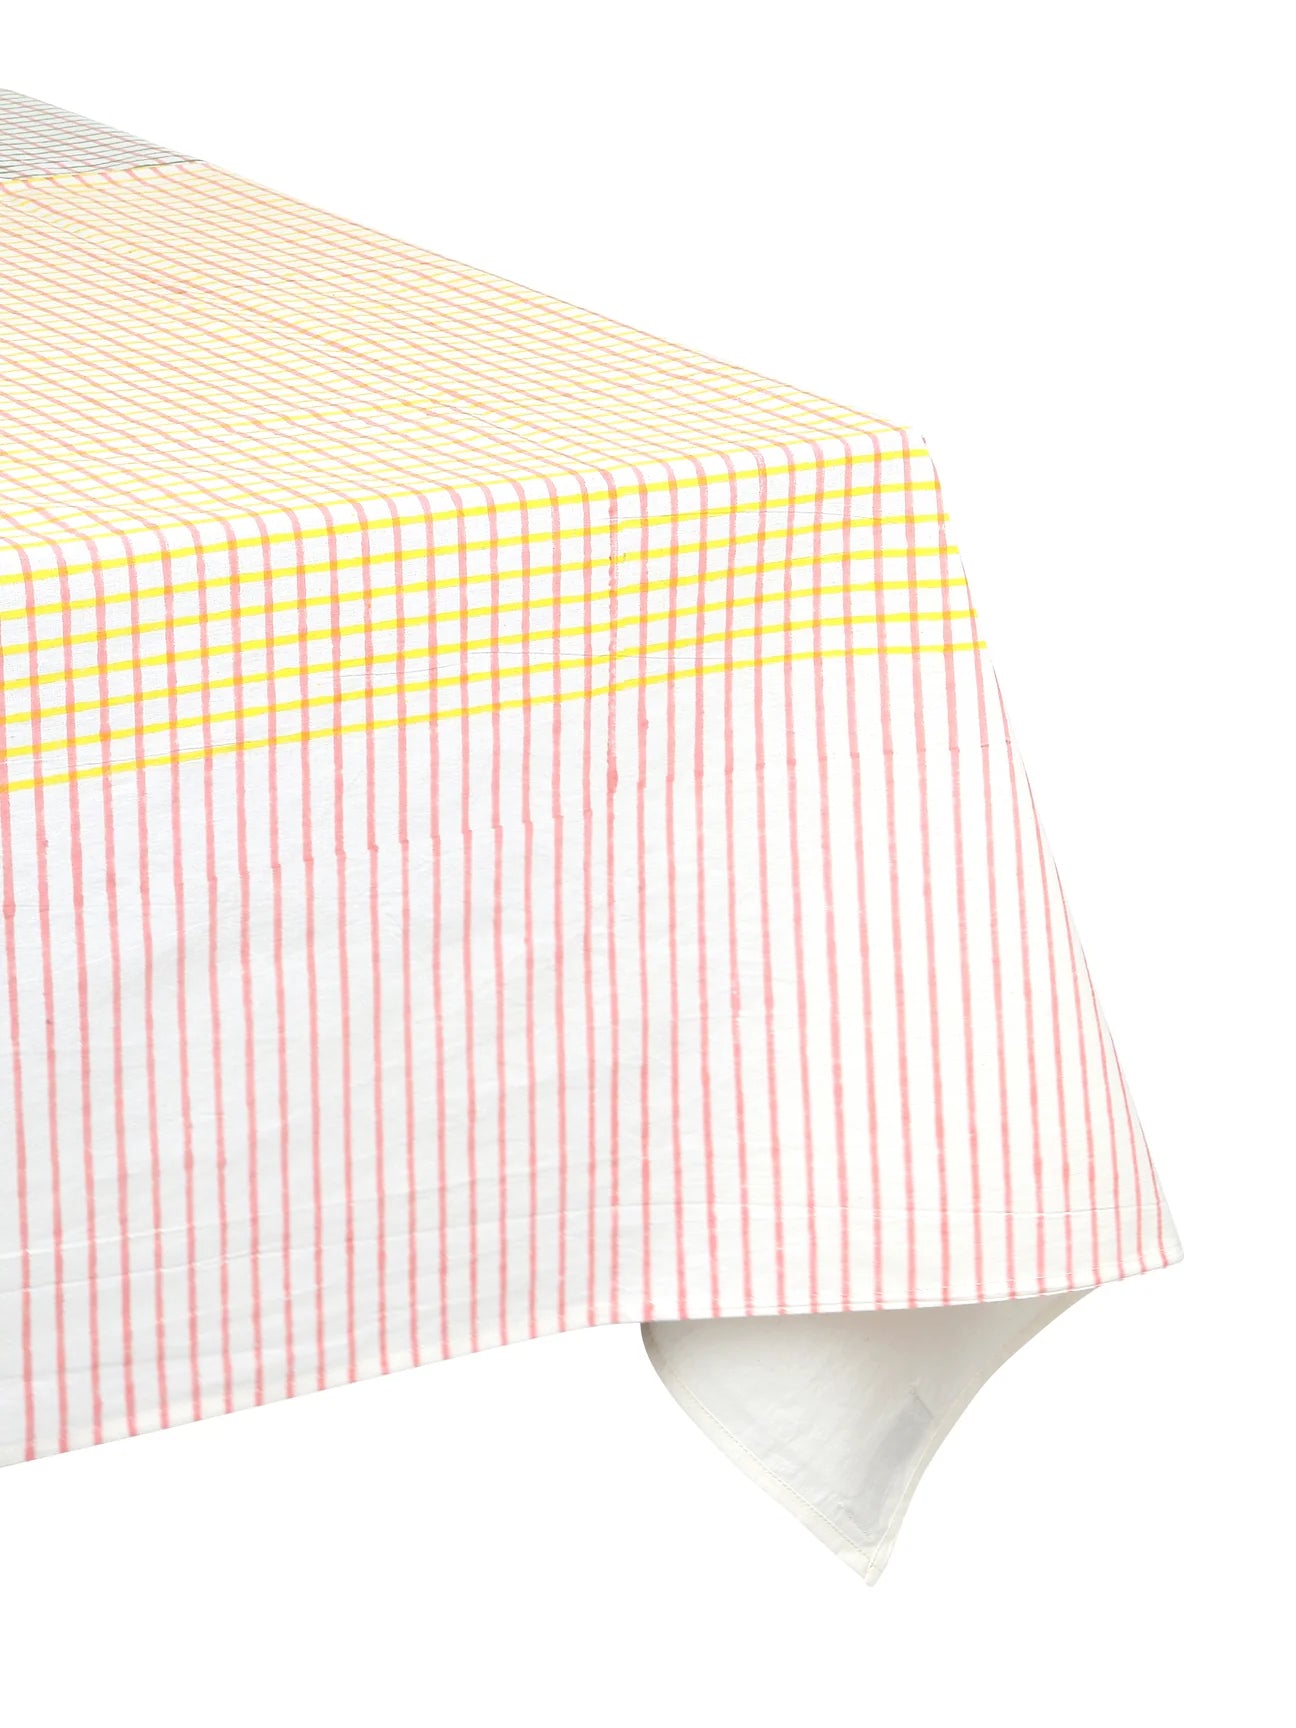 Melody Rose Tablecloth